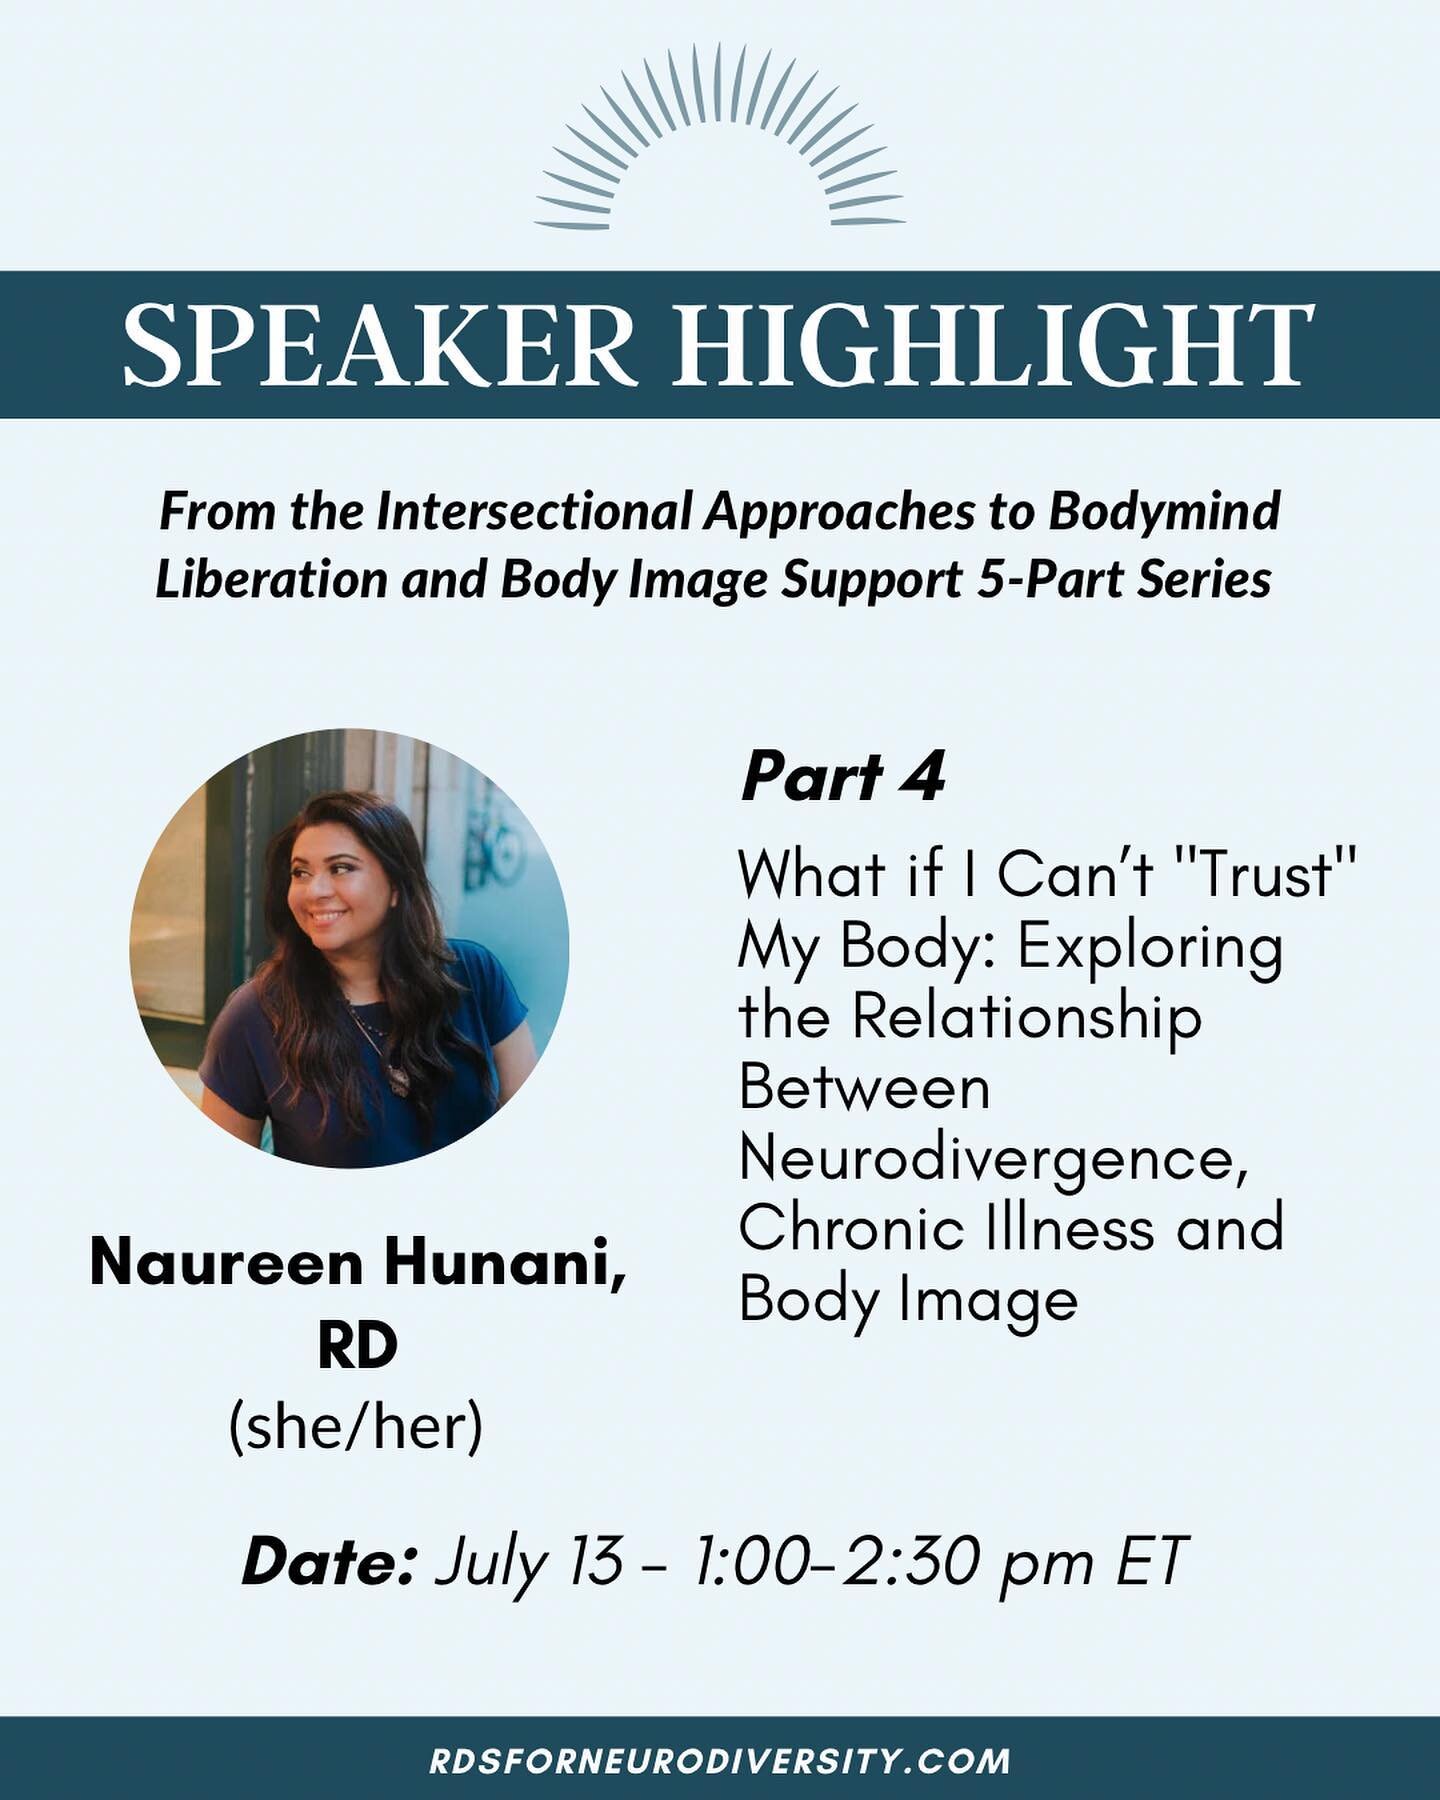 Part 4: What if I Can&rsquo;t &quot;Trust&quot; My Body: Exploring the Relationship Between Neurodivergence, Chronic Illness and Body Image ⁣
⁣
Presenter: Naureen Hunani, RD (she/her)⁣
⁣
Neurodivergent people, specifically autistic individuals, are m